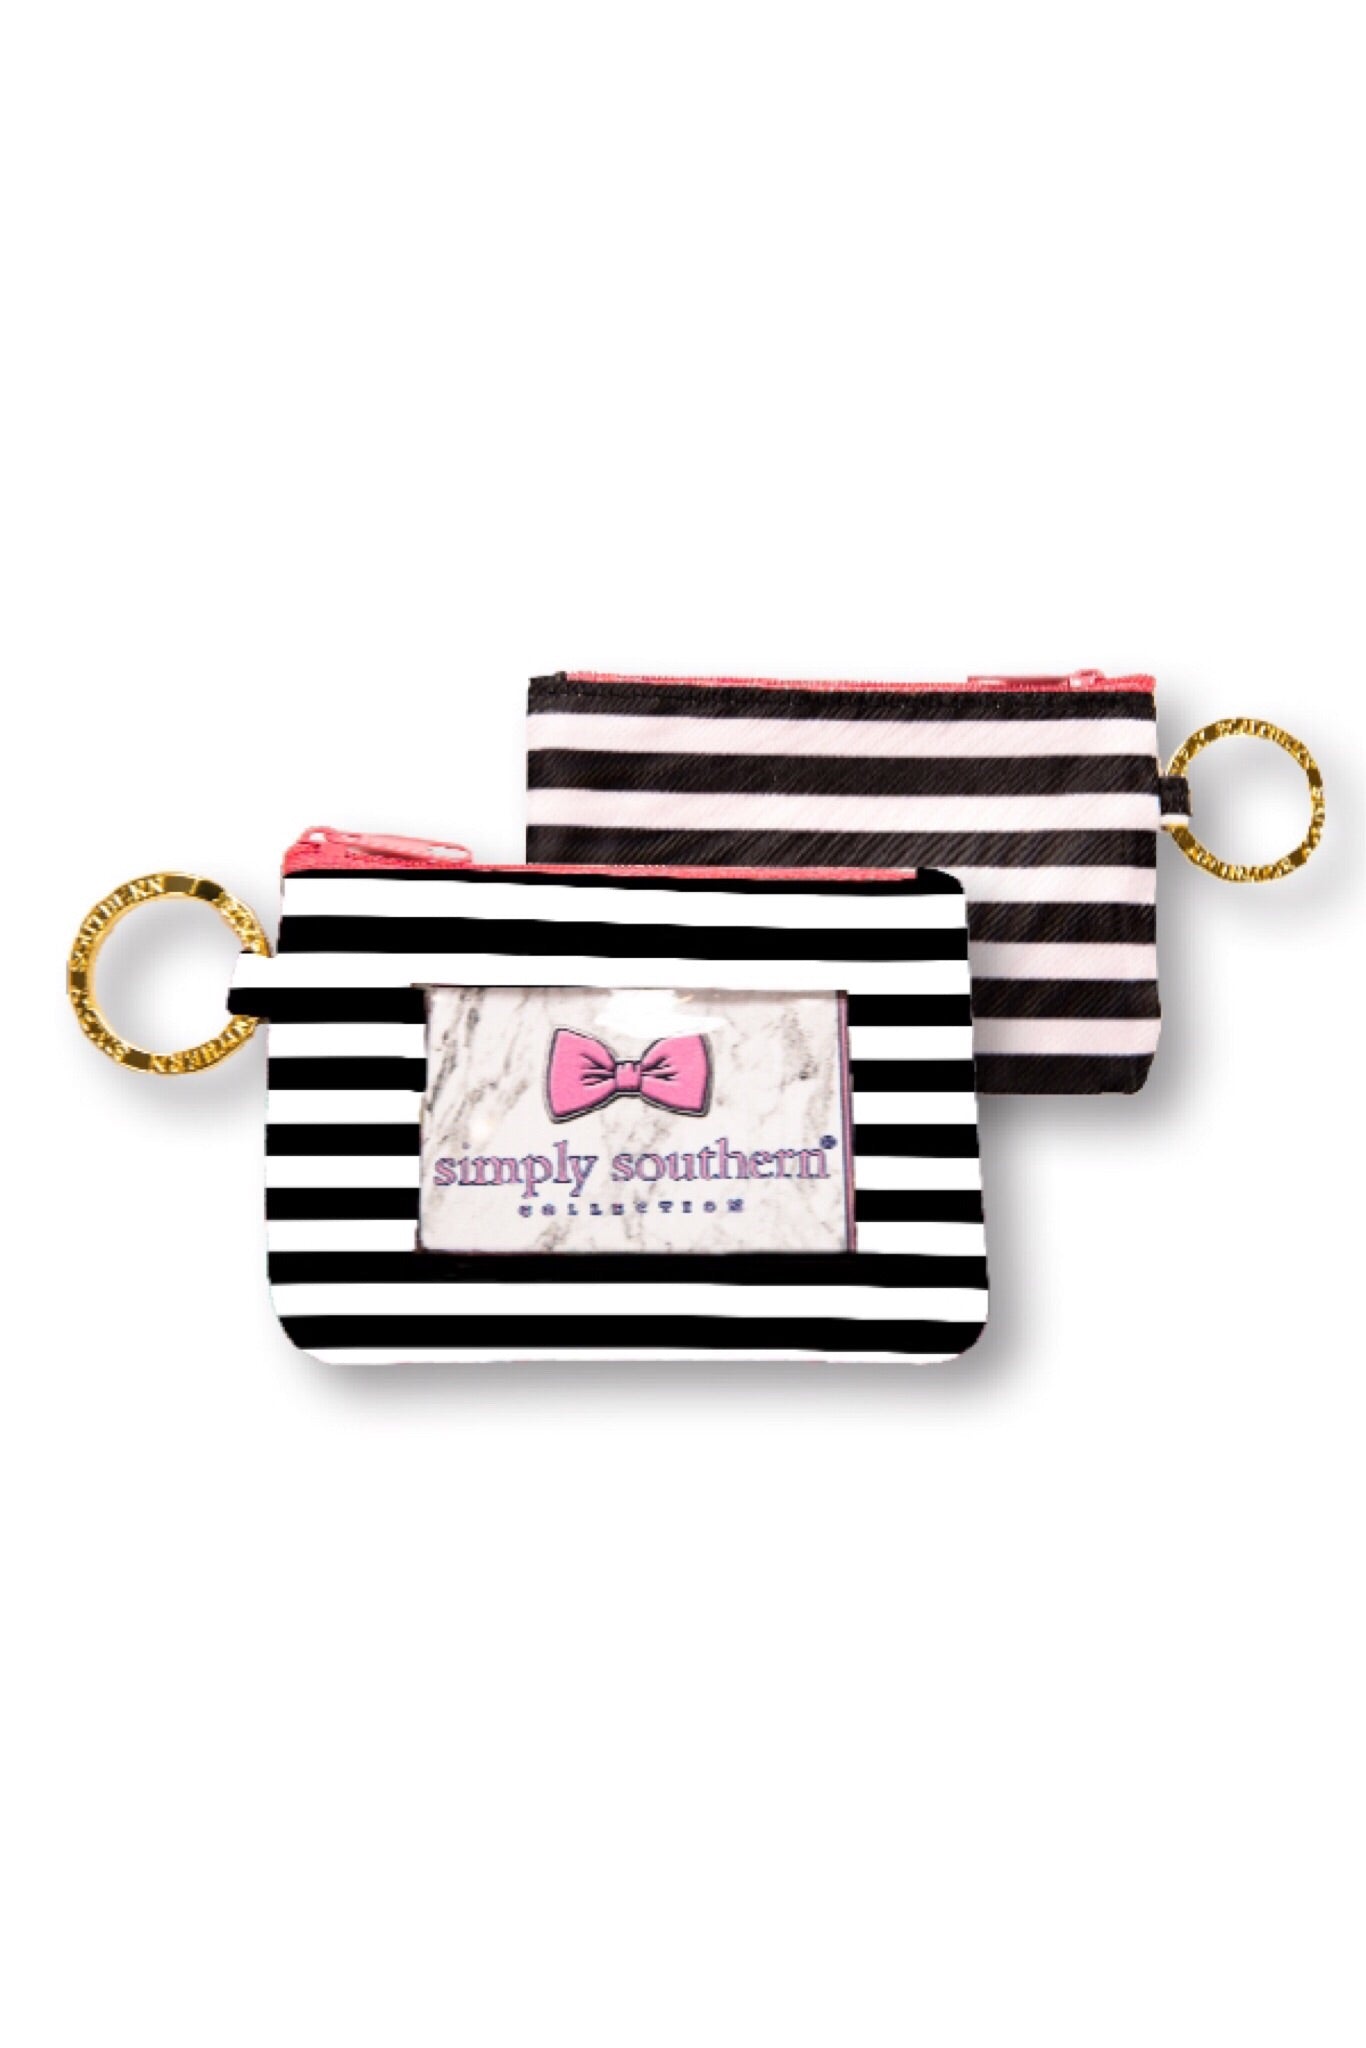 Simply Southern Key ID Pouches